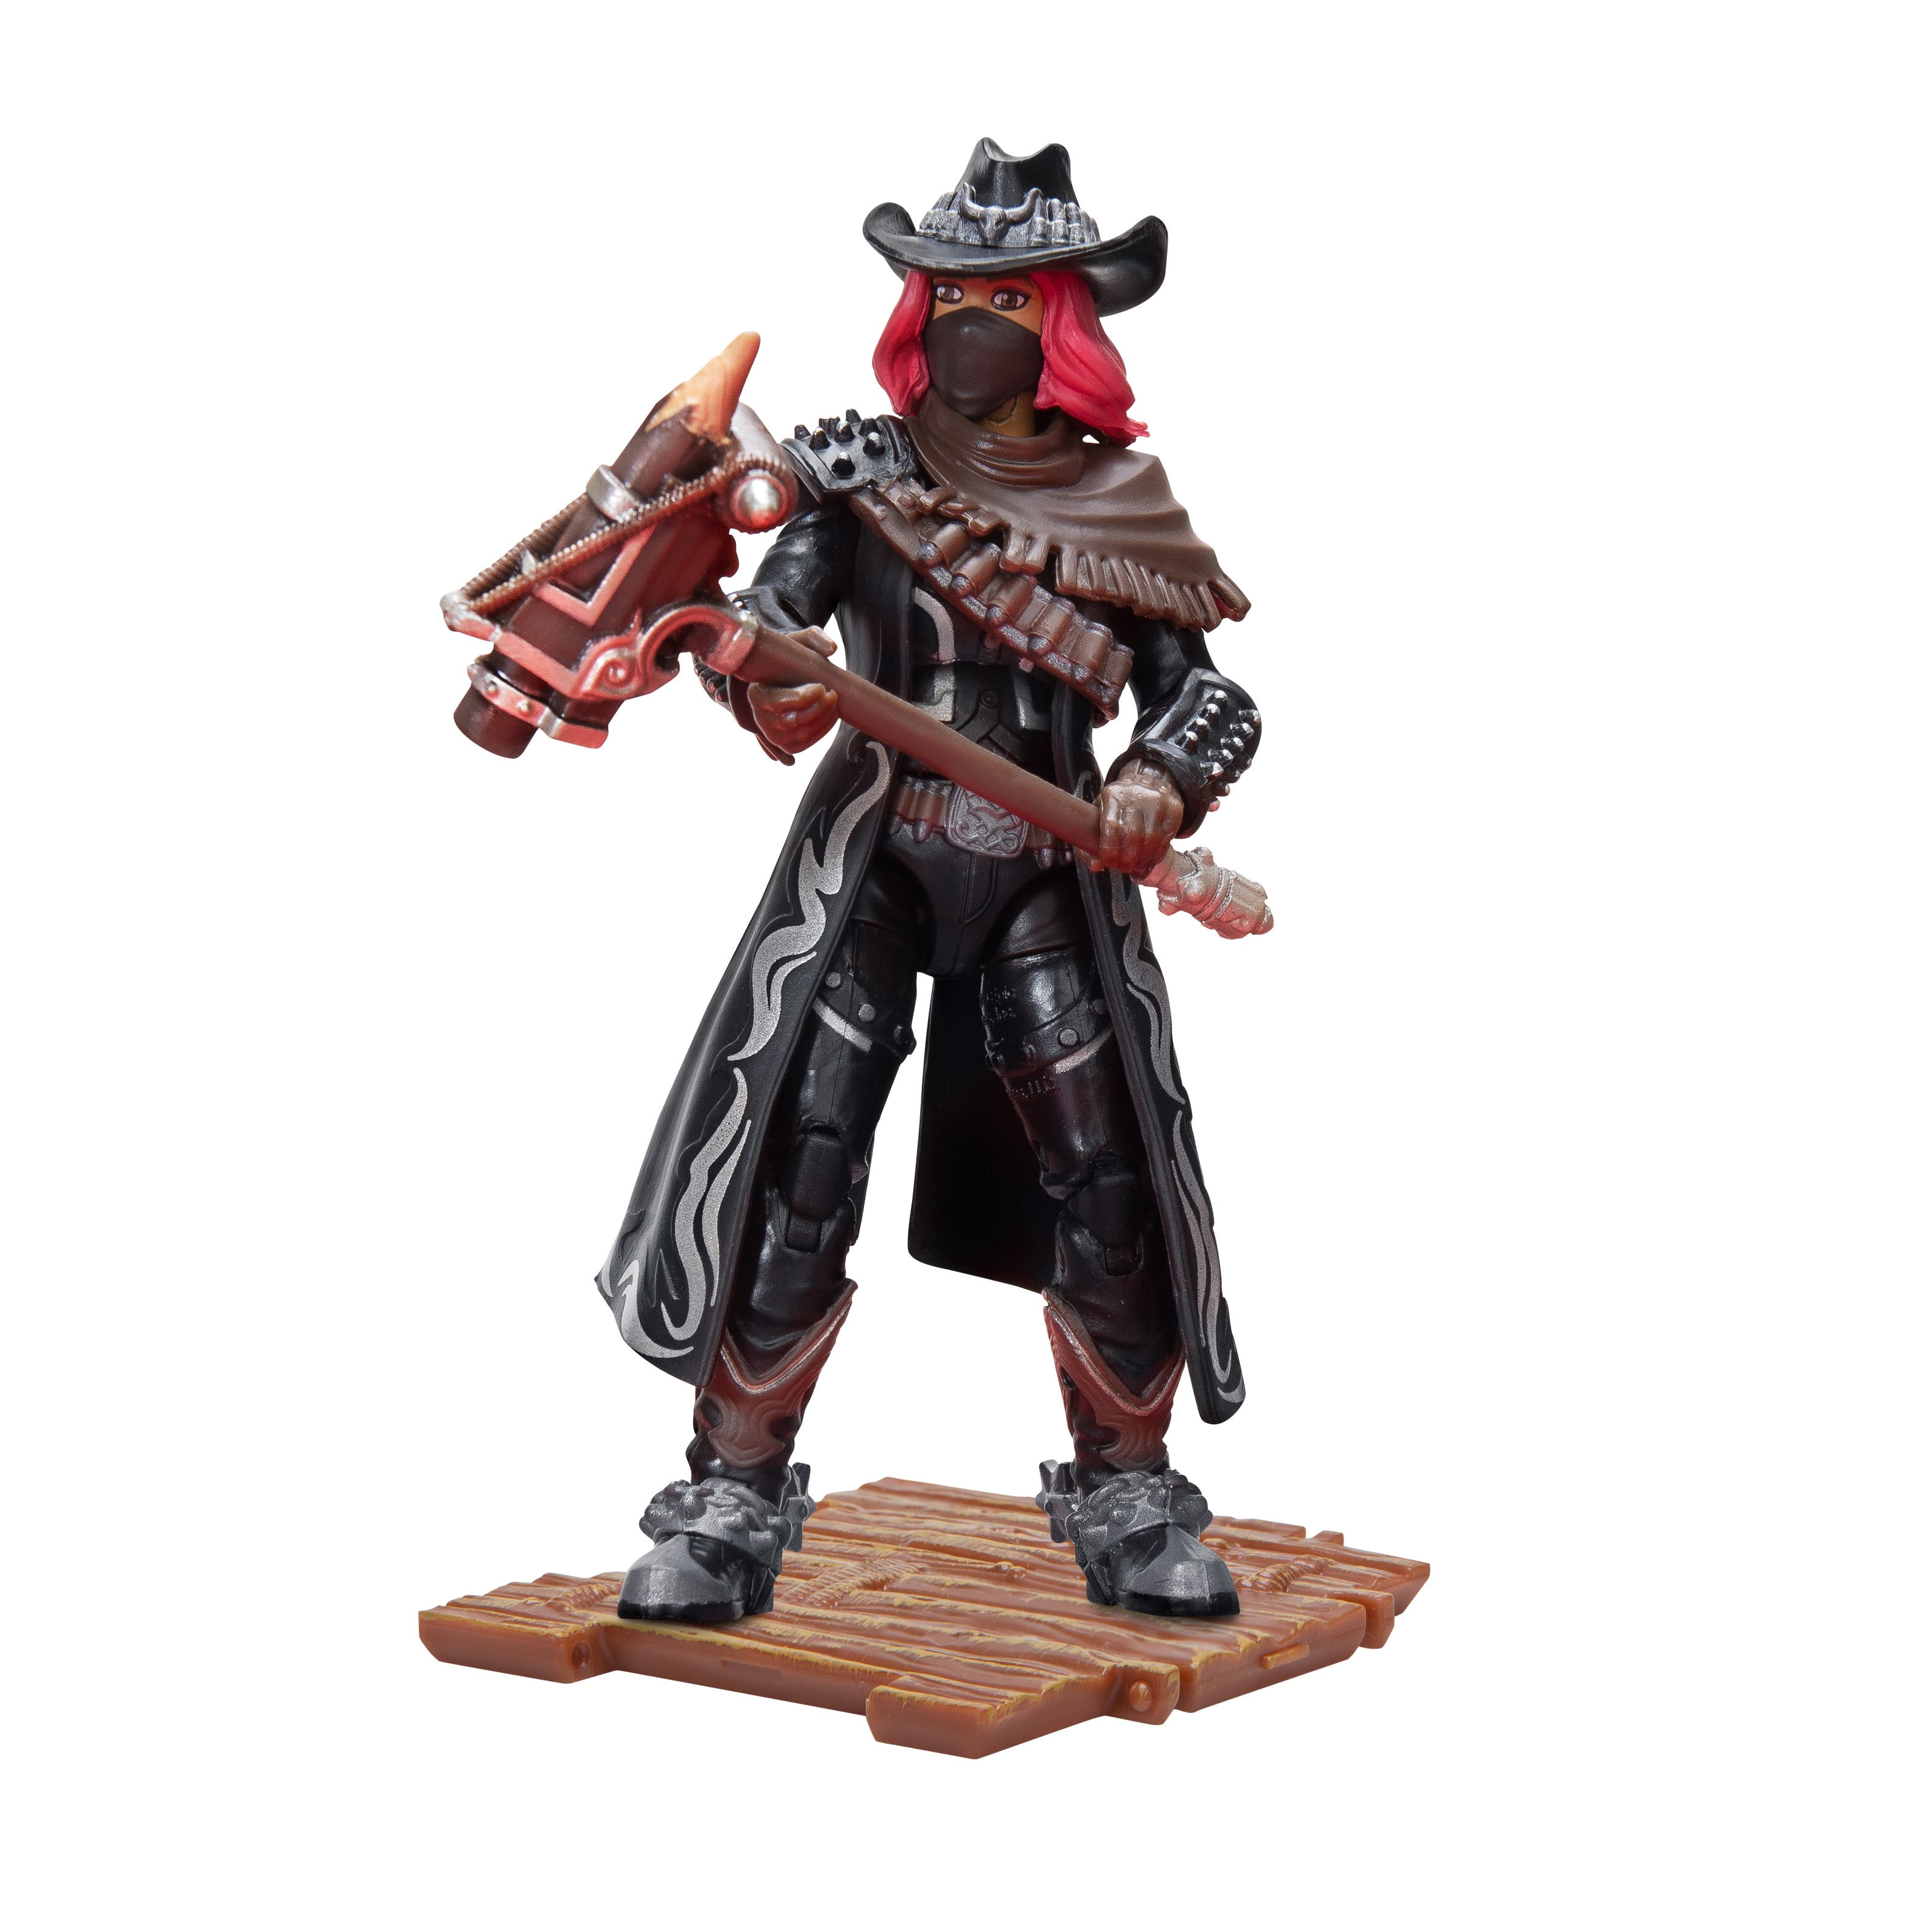 Fortnite Calamity Solo Mode Action Figure 10cm Epic Games Christmas Gift for sale online